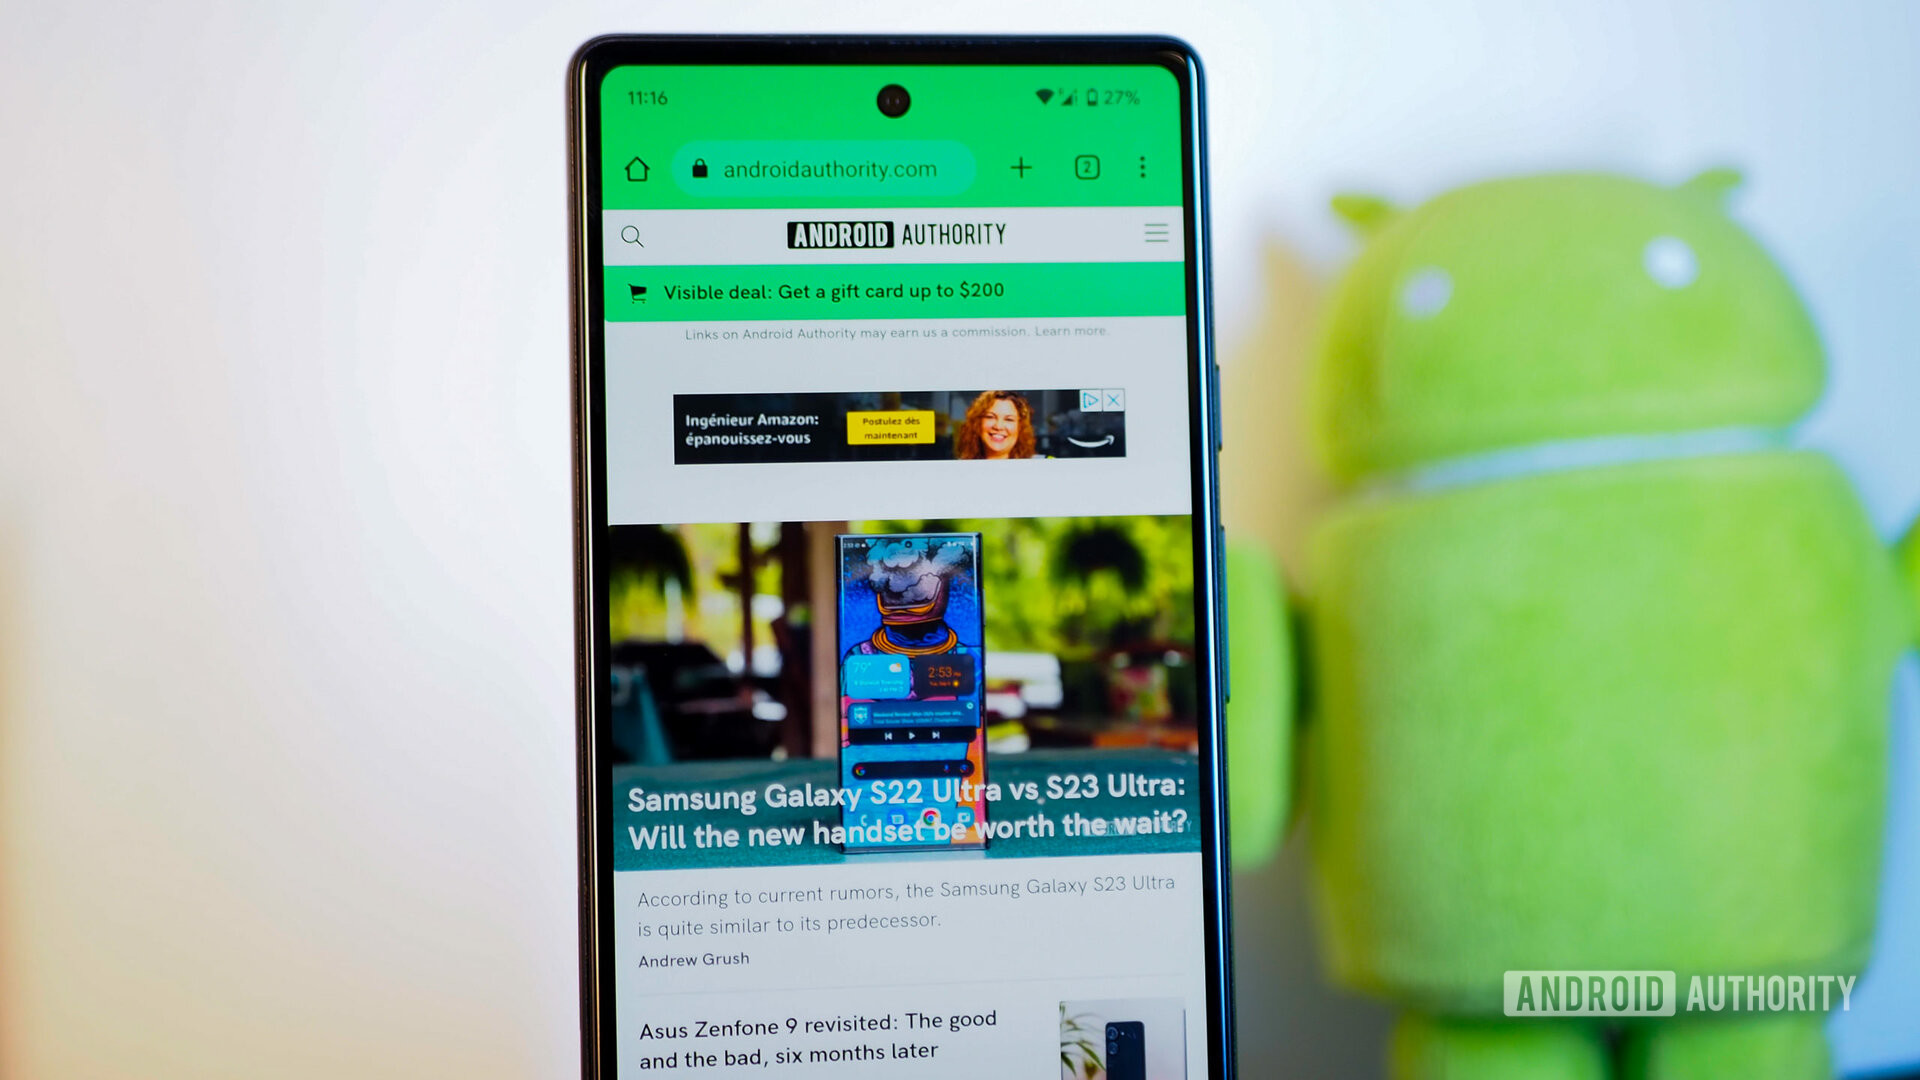 Google Pixel 6a, display on, showing the Android Authority website in Chrome